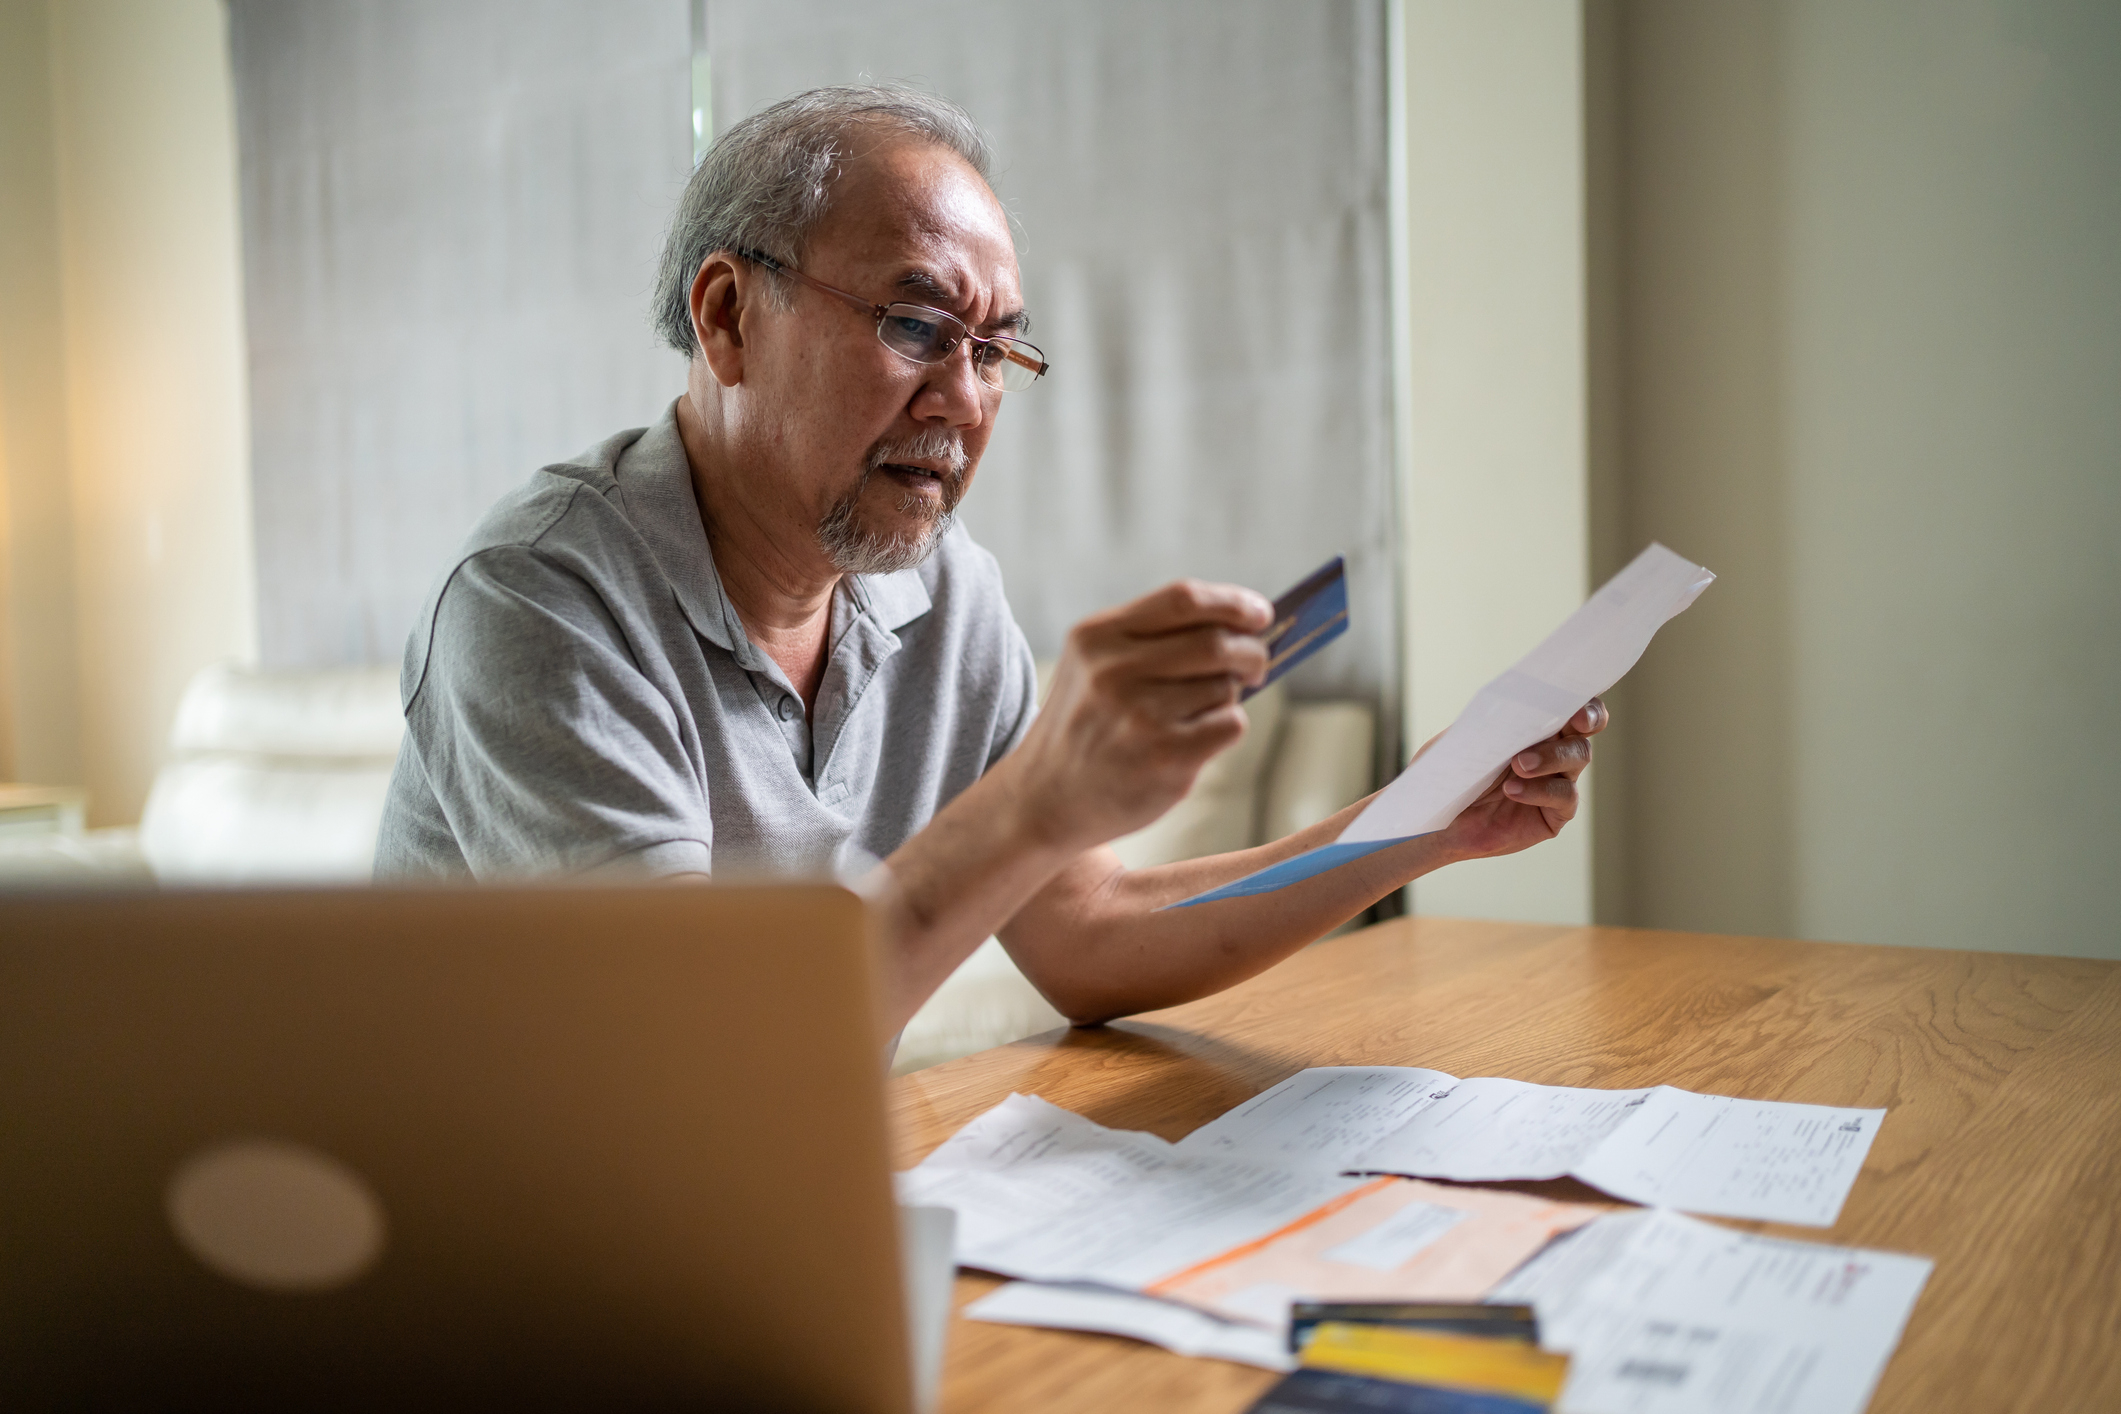 An older adult is holding a credit card and paper, looking confused, with a laptop and documents on the table